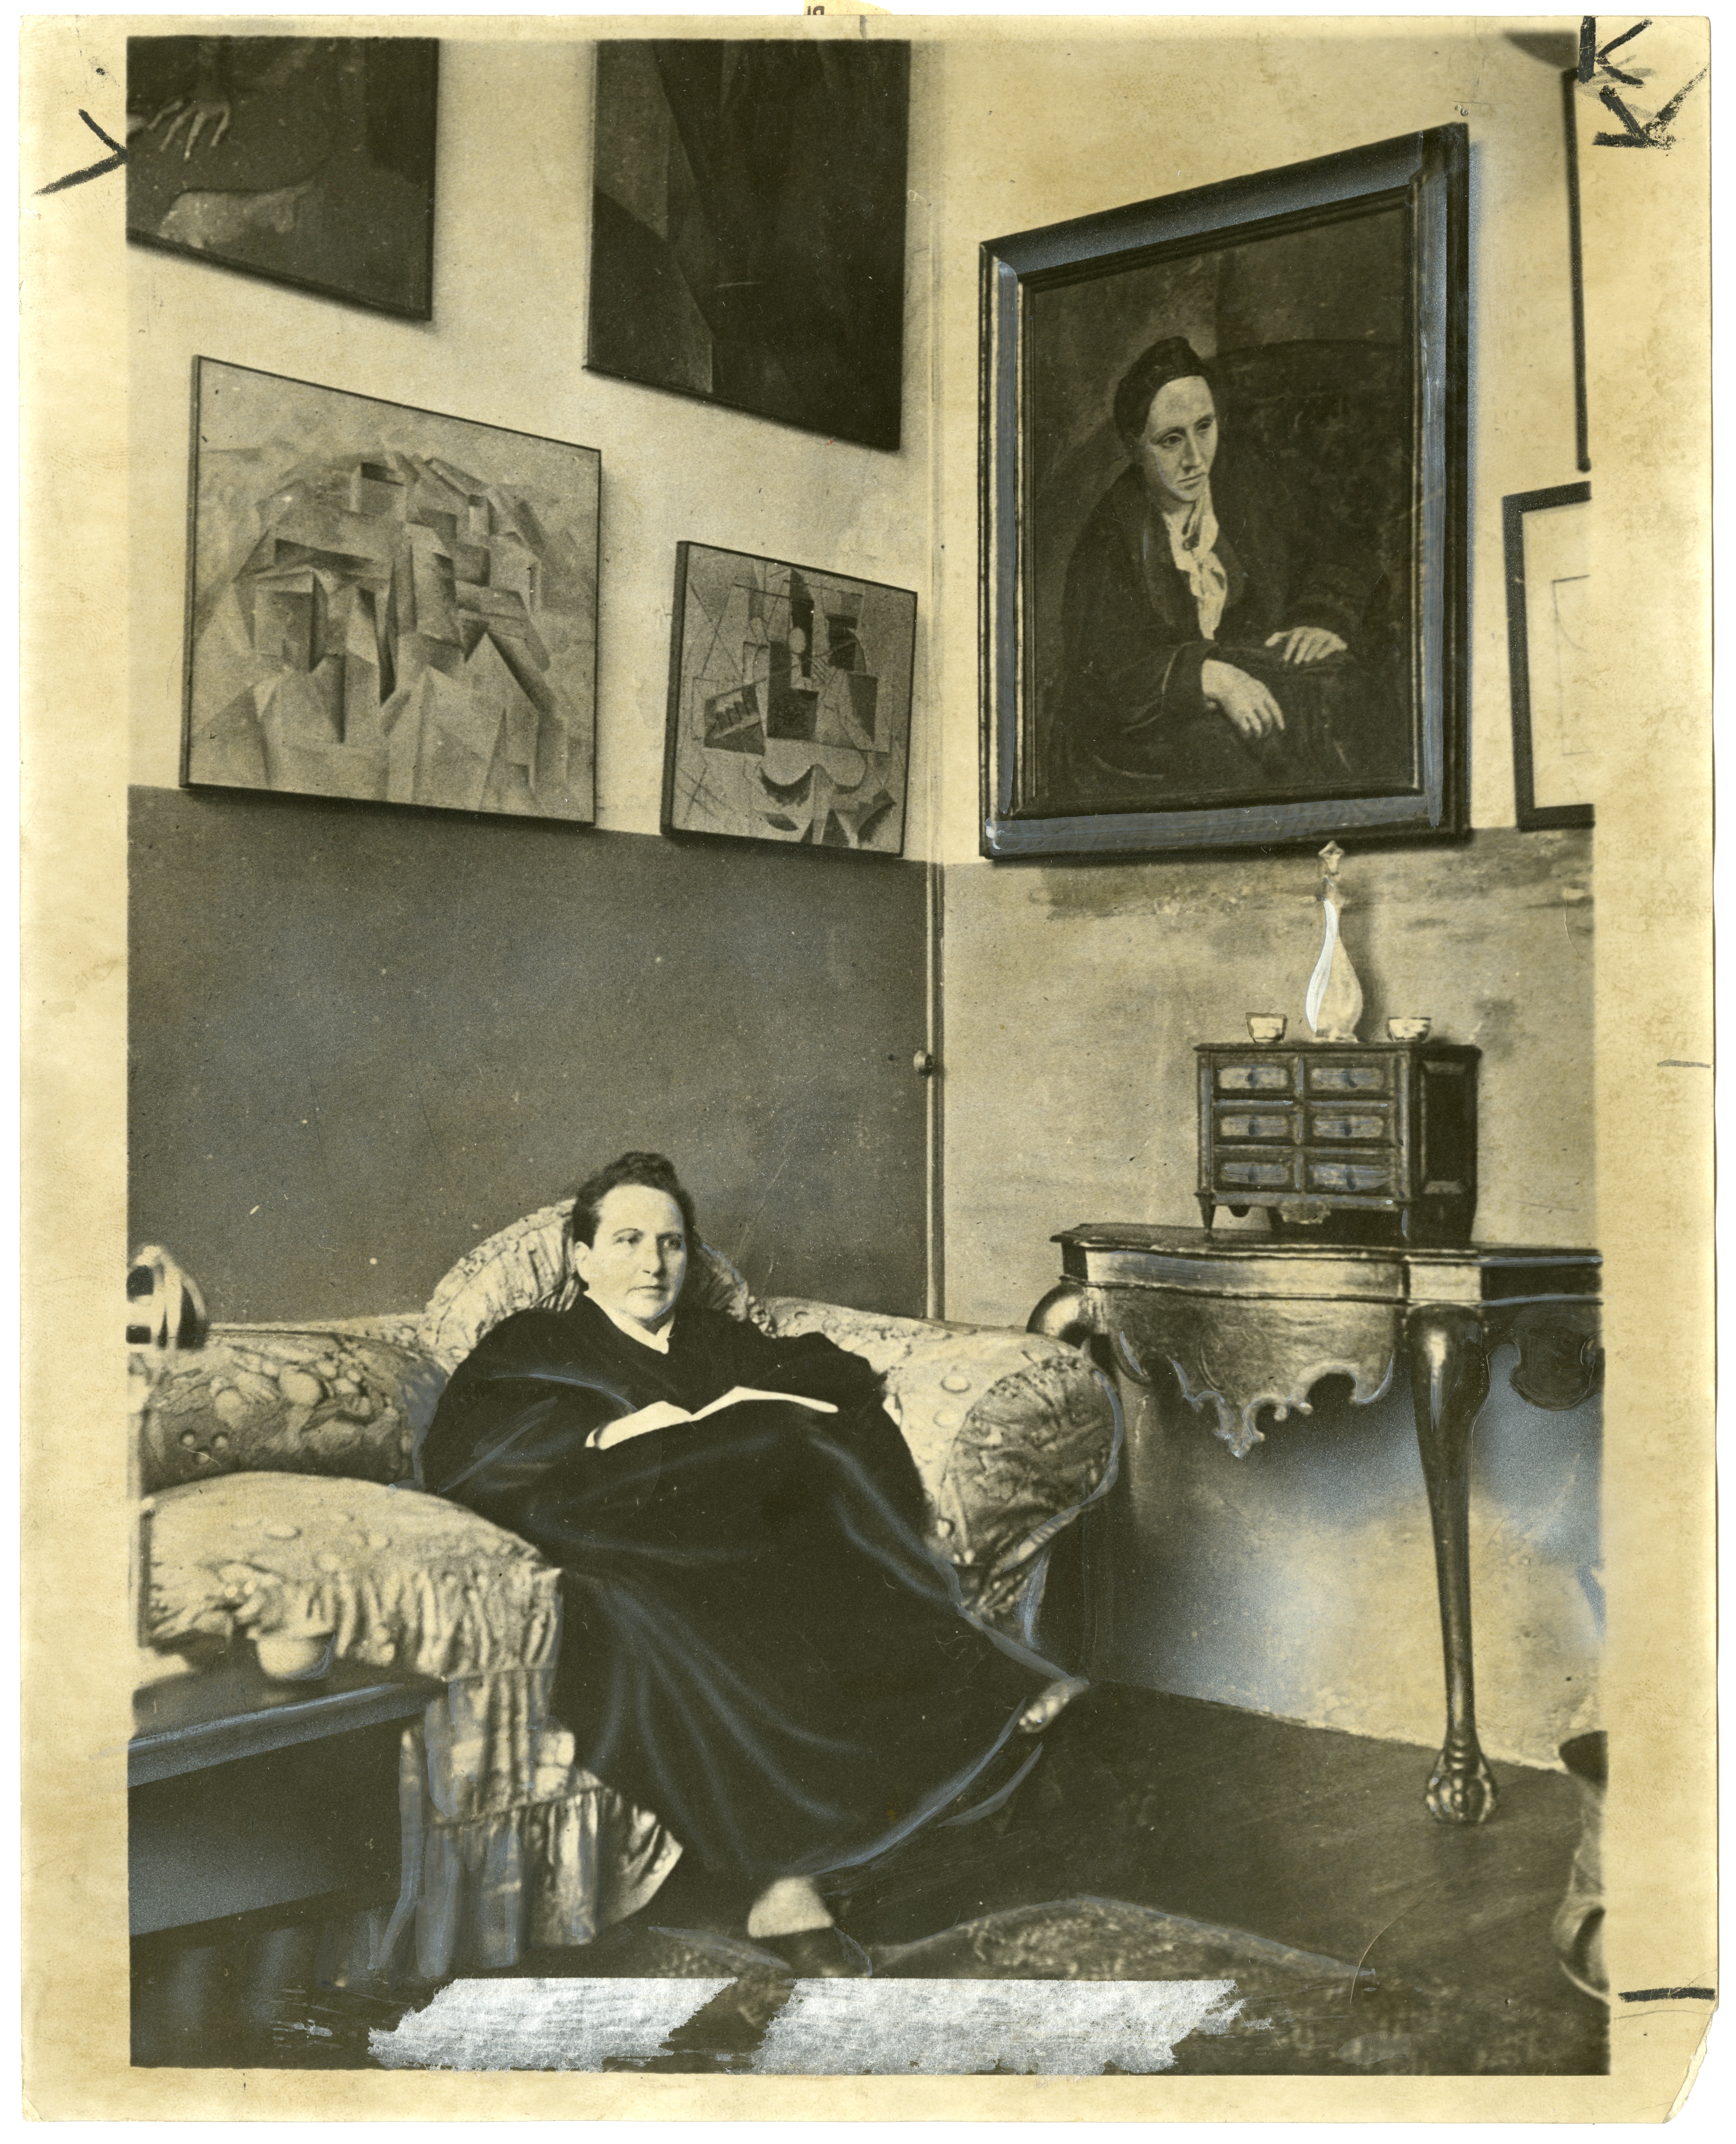 Gertrude Stein at home under her portrait by Picasso, who is a character in "Twenty-Seven."